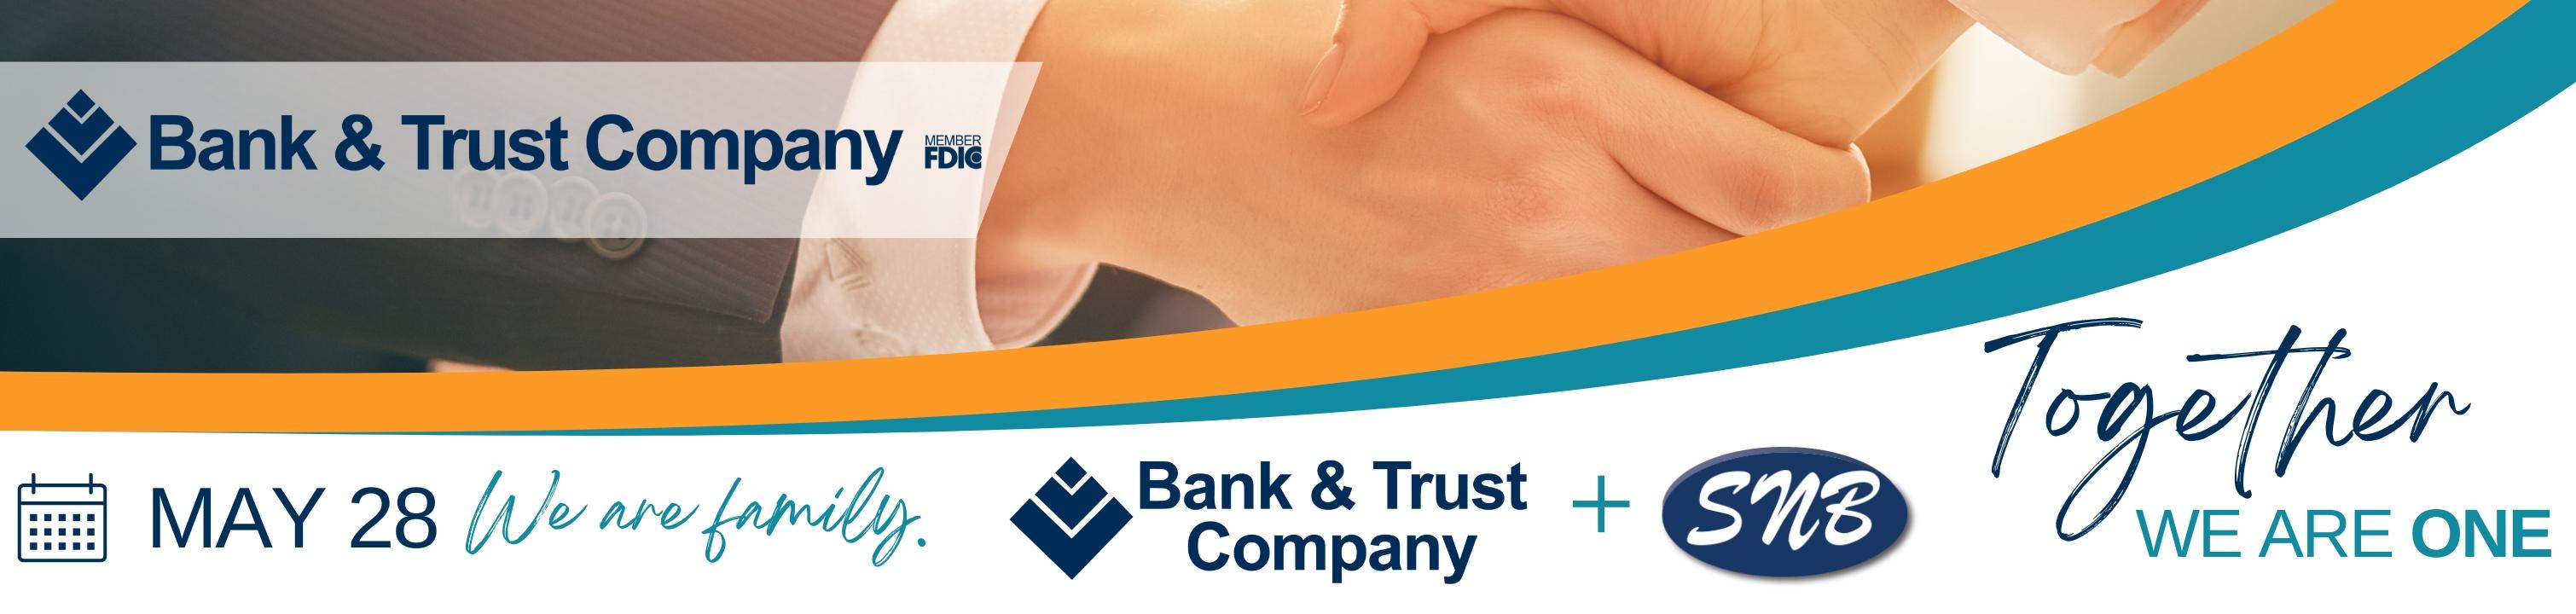 Security National Bank will become part of Bank & Trust Company May 28